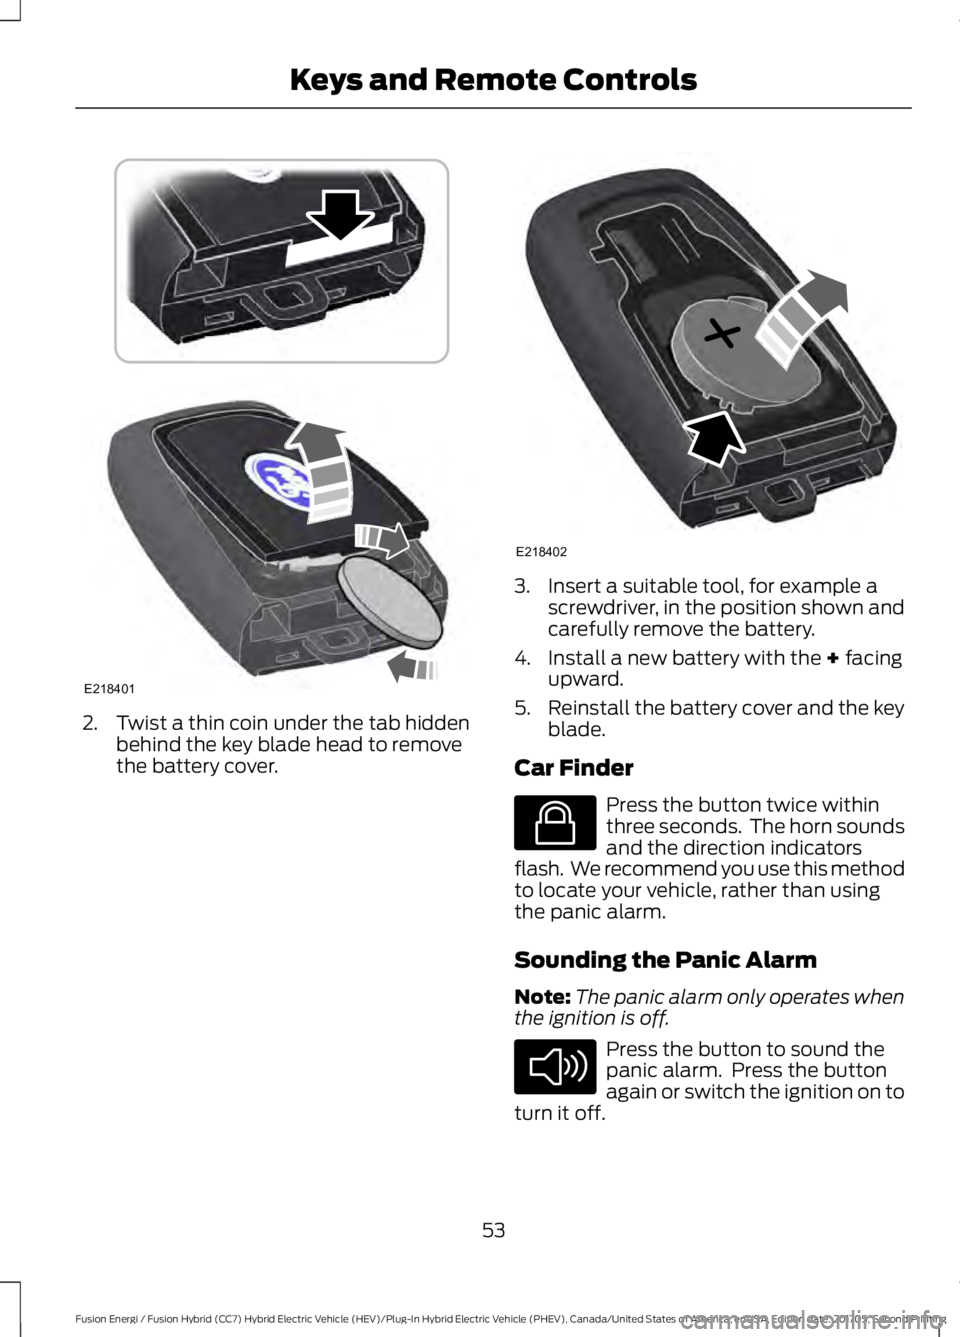 FORD FUSION ENERGI 2018  Owners Manual 2. Twist a thin coin under the tab hiddenbehind the key blade head to removethe battery cover.
3. Insert a suitable tool, for example ascrewdriver, in the position shown andcarefully remove the batter